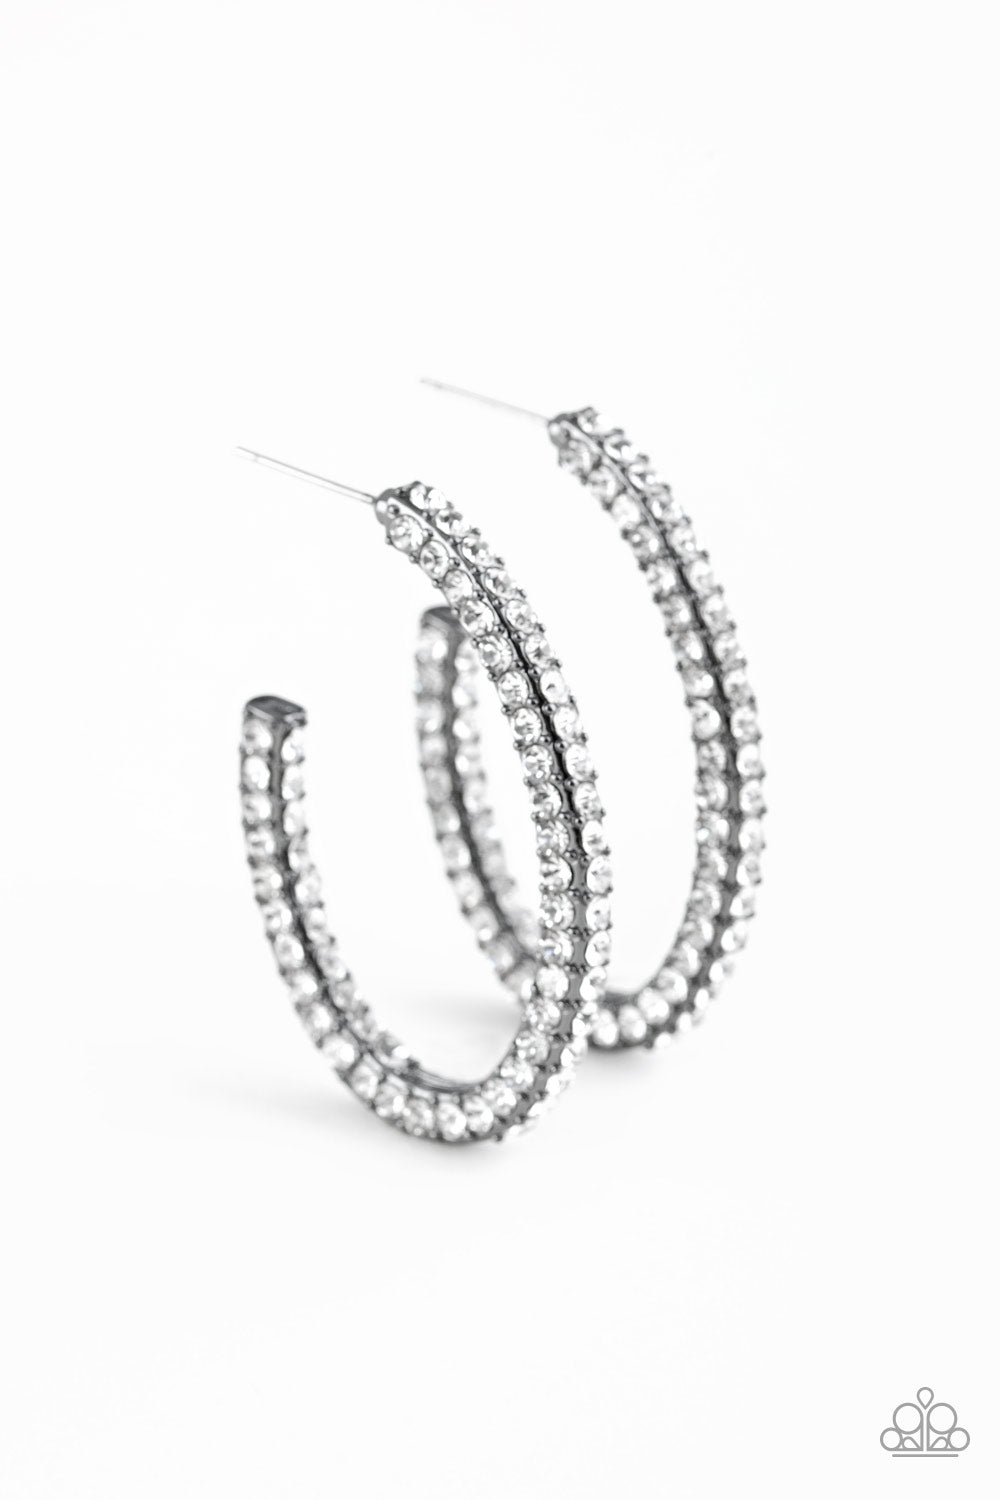 Big Winner - Black Item #E272 Glassy white rhinestones are encrusted along three sides of an abstract gunmetal hoop for a glamorous look. Earring attaches to a standard post fitting. Hoop measures 1" in diameter. All Paparazzi Accessories are lead free and nickel free!  Sold as one pair of hoop earrings.